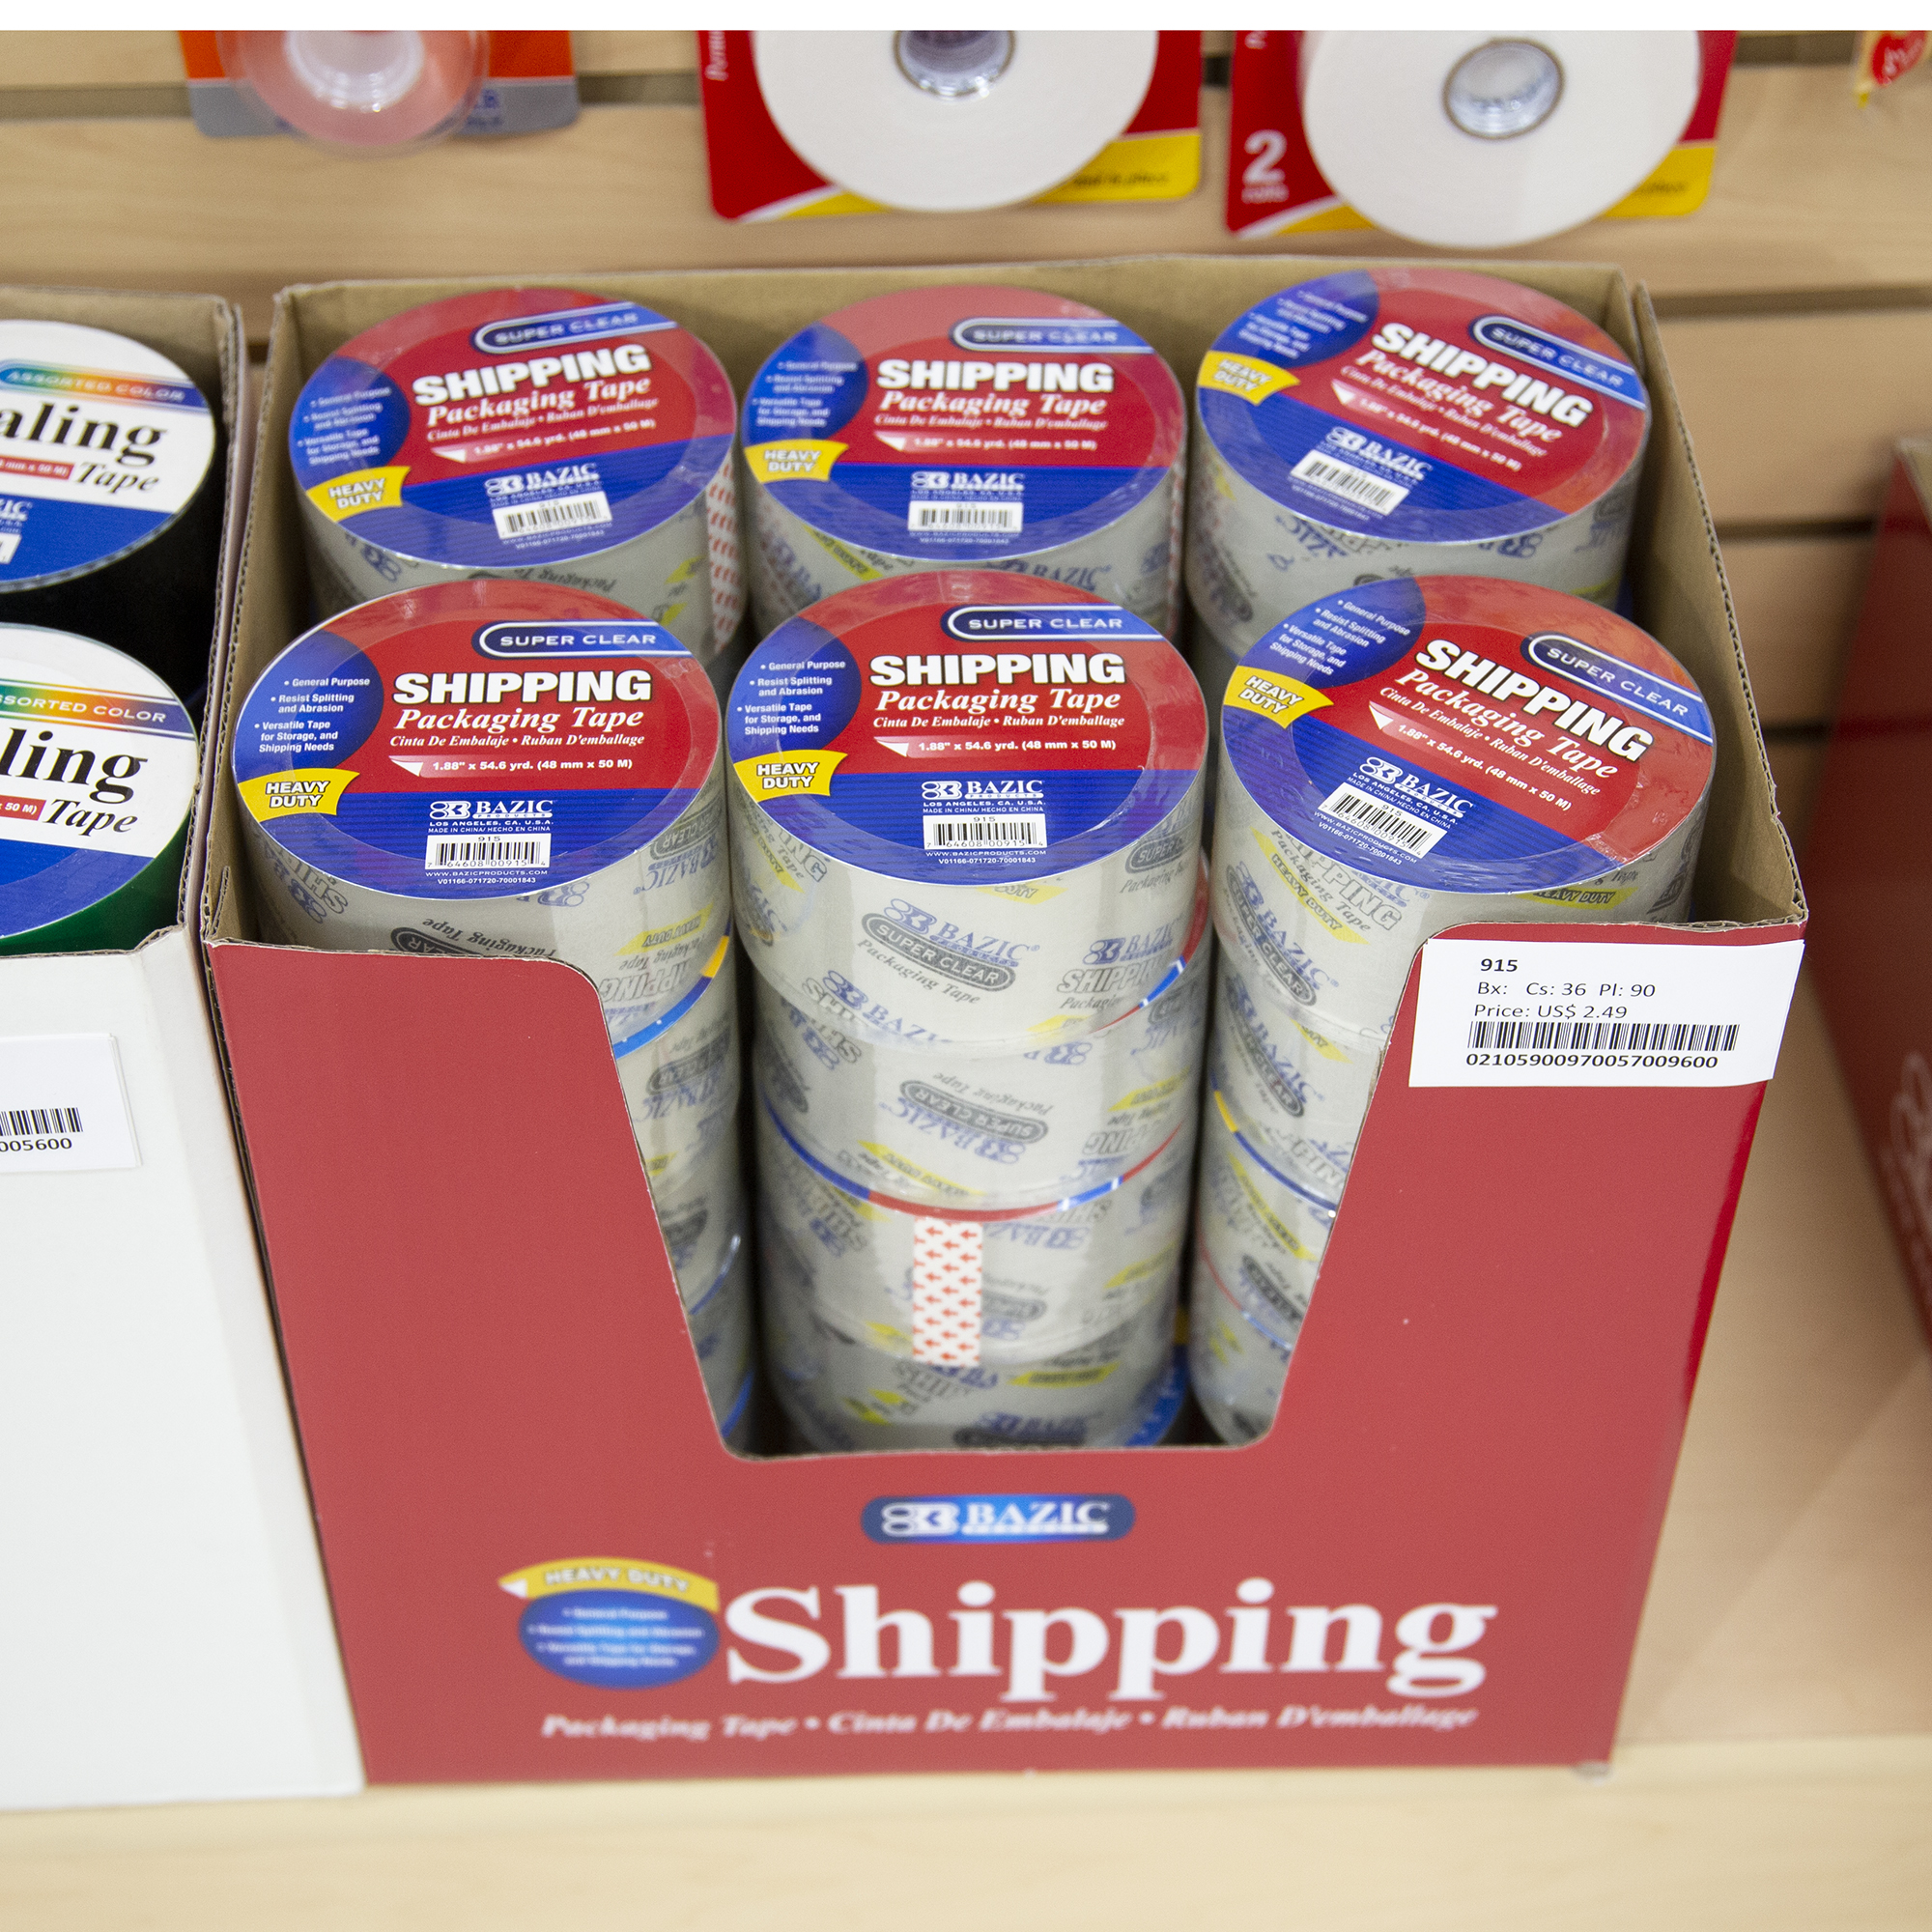 BAZIC 1.88 X 54.6 Yards Color Packing Tape Bazic Products